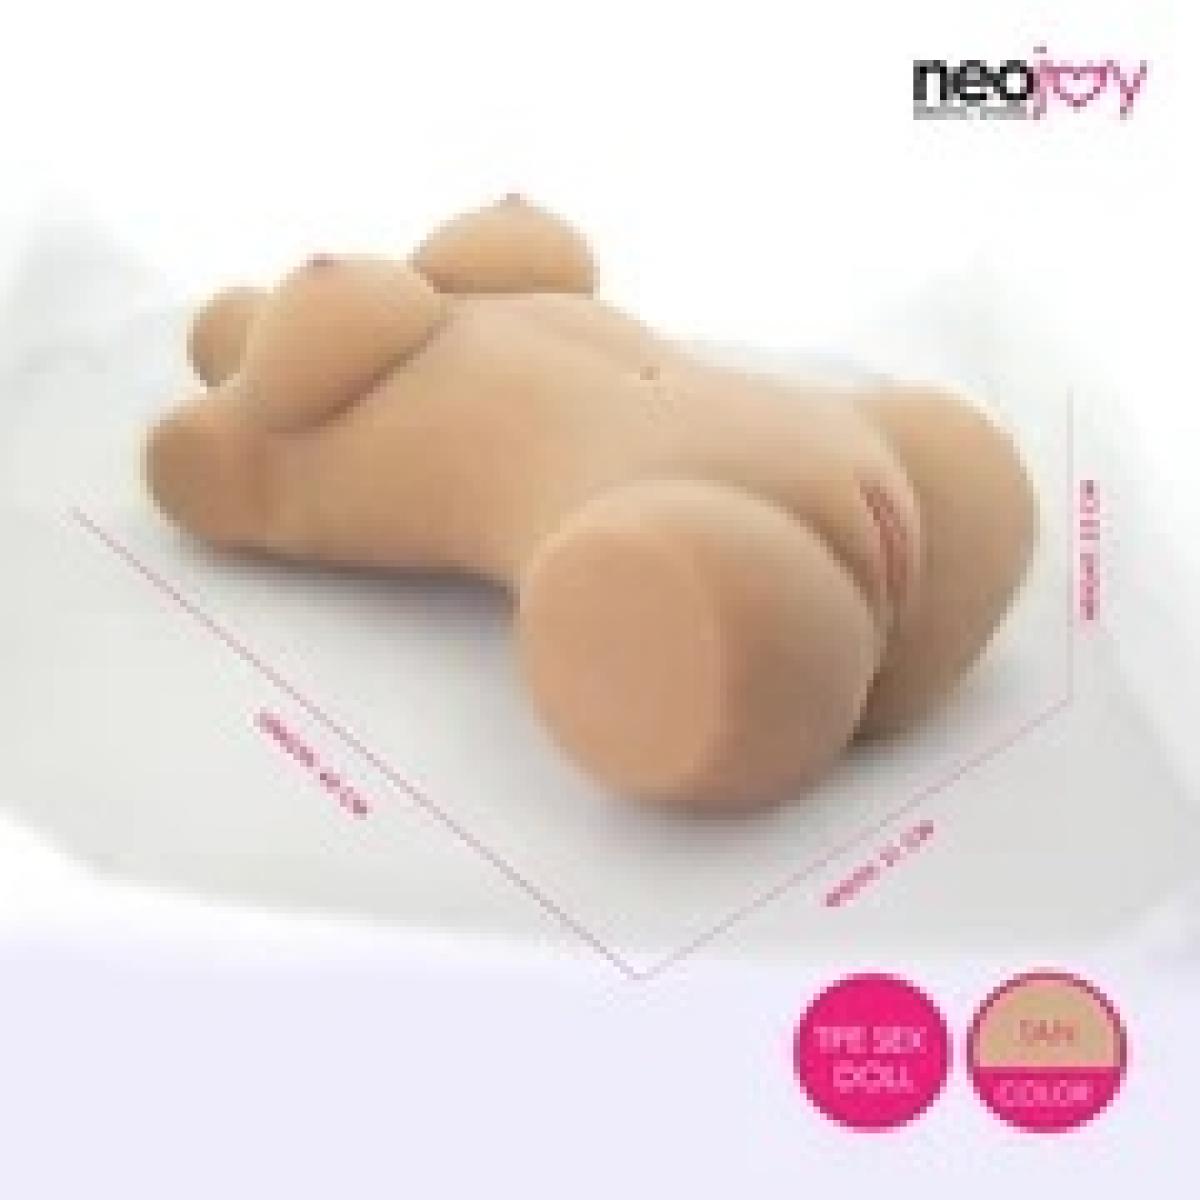 Neojoy Easy Torso With Girlfriend Denise Head - Realistic Sex Doll Torso With Head Connector - Tan - 17kg